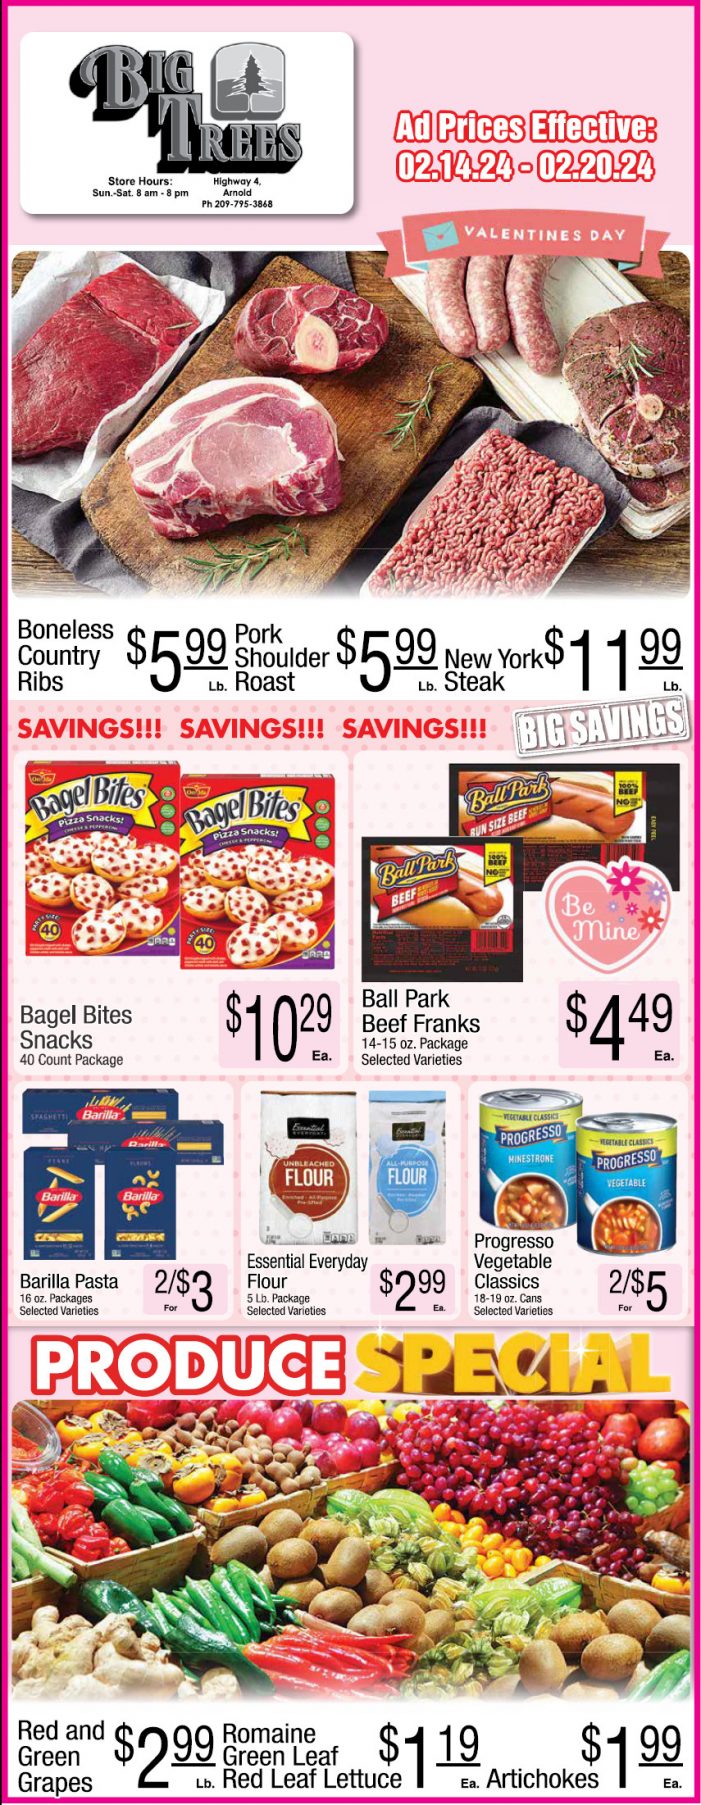 Big Trees Market Weekly Ad, Grocery, Produce, Meat & Deli Specials Through February 20th! Shop Local & Save!